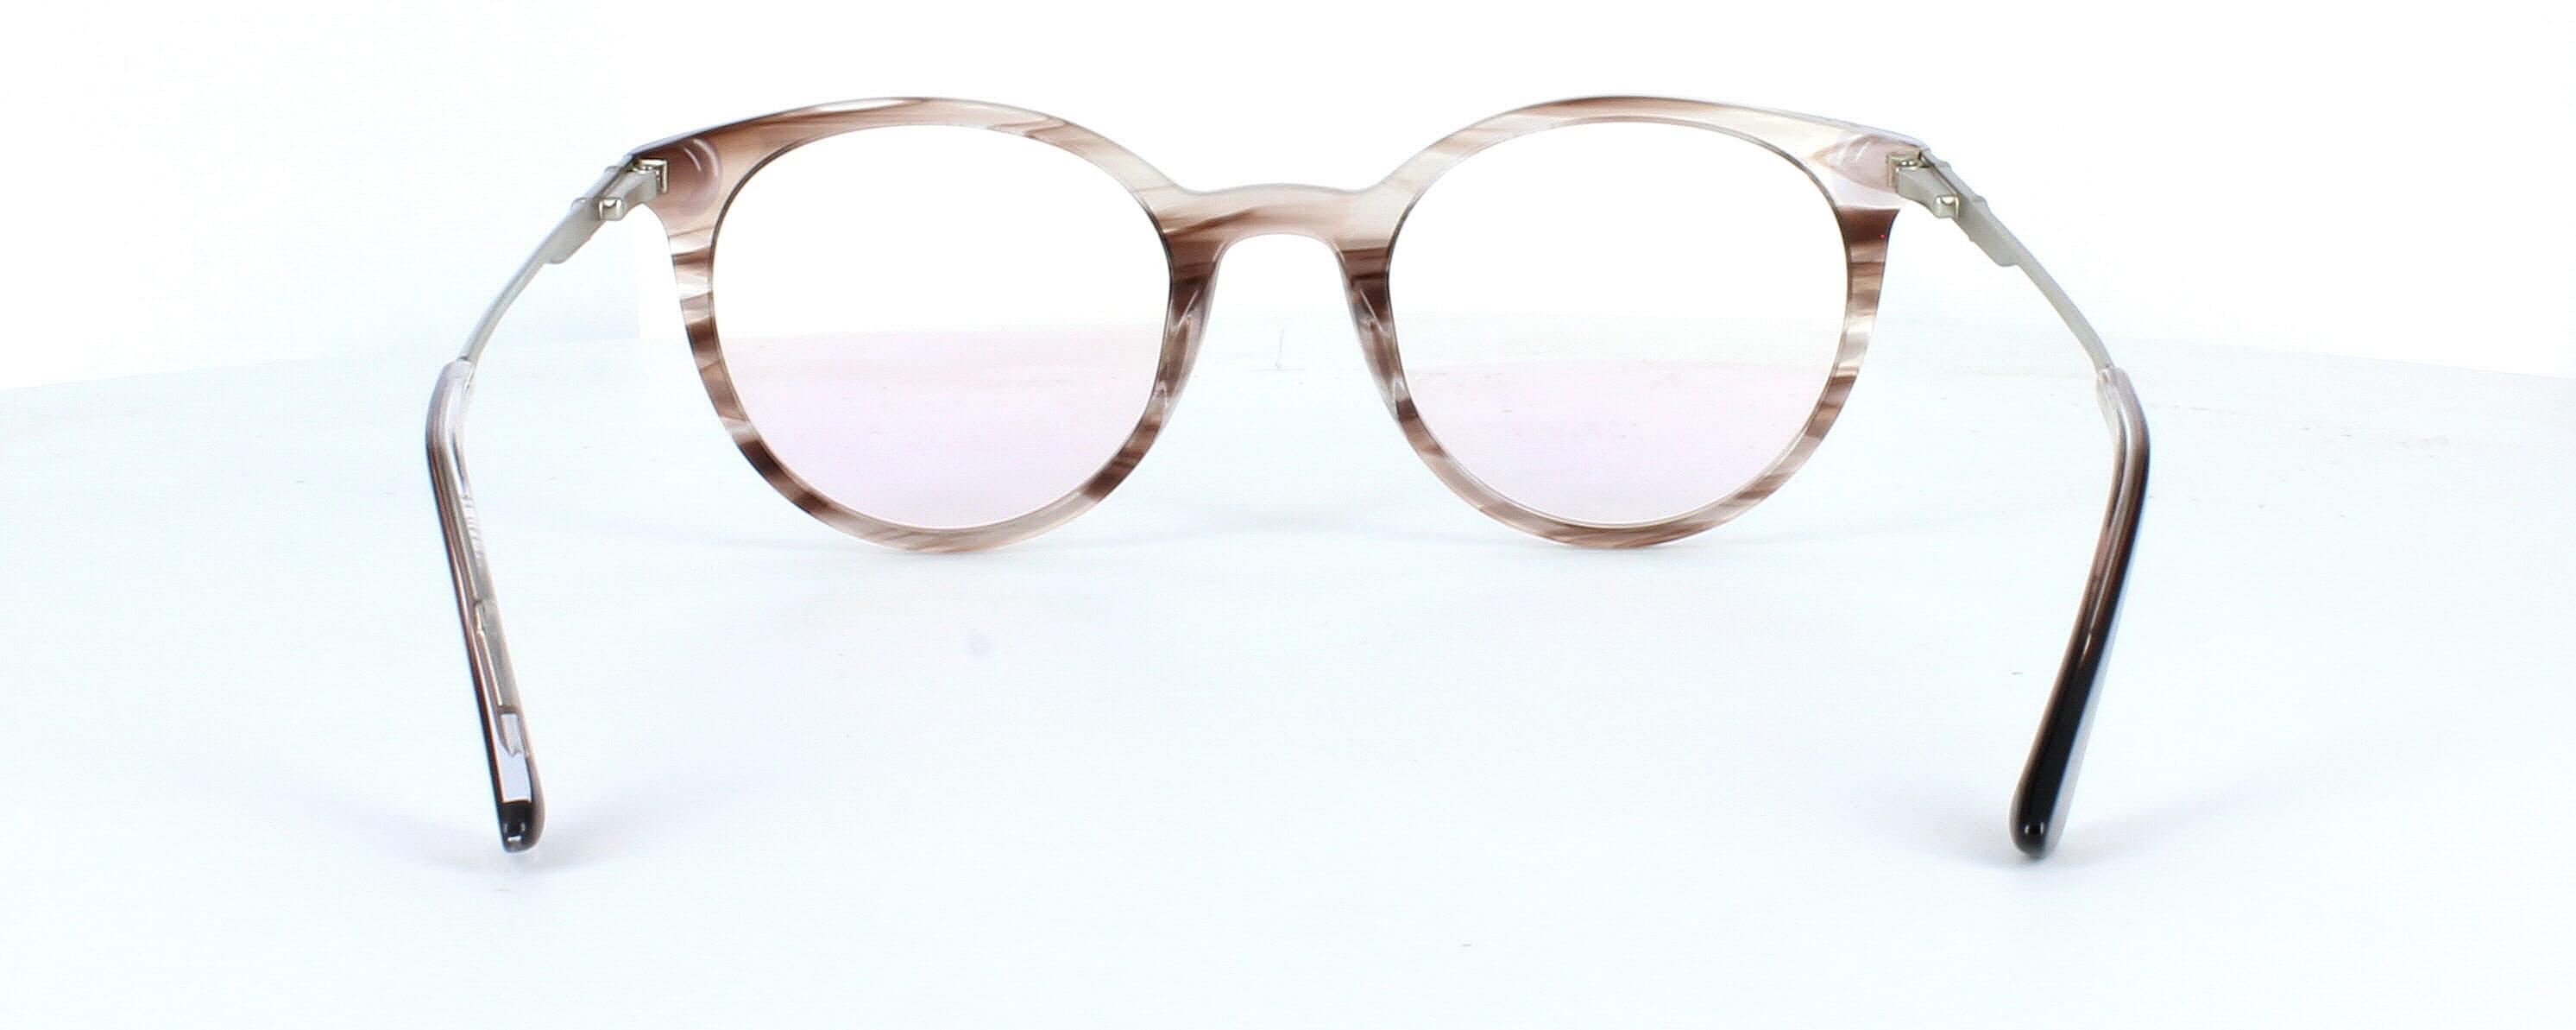 Edward Scotts BJ9211 - Brown -  Women's round shaped acetate with gold metal arms that are sprung hinged at the temples - image view 4